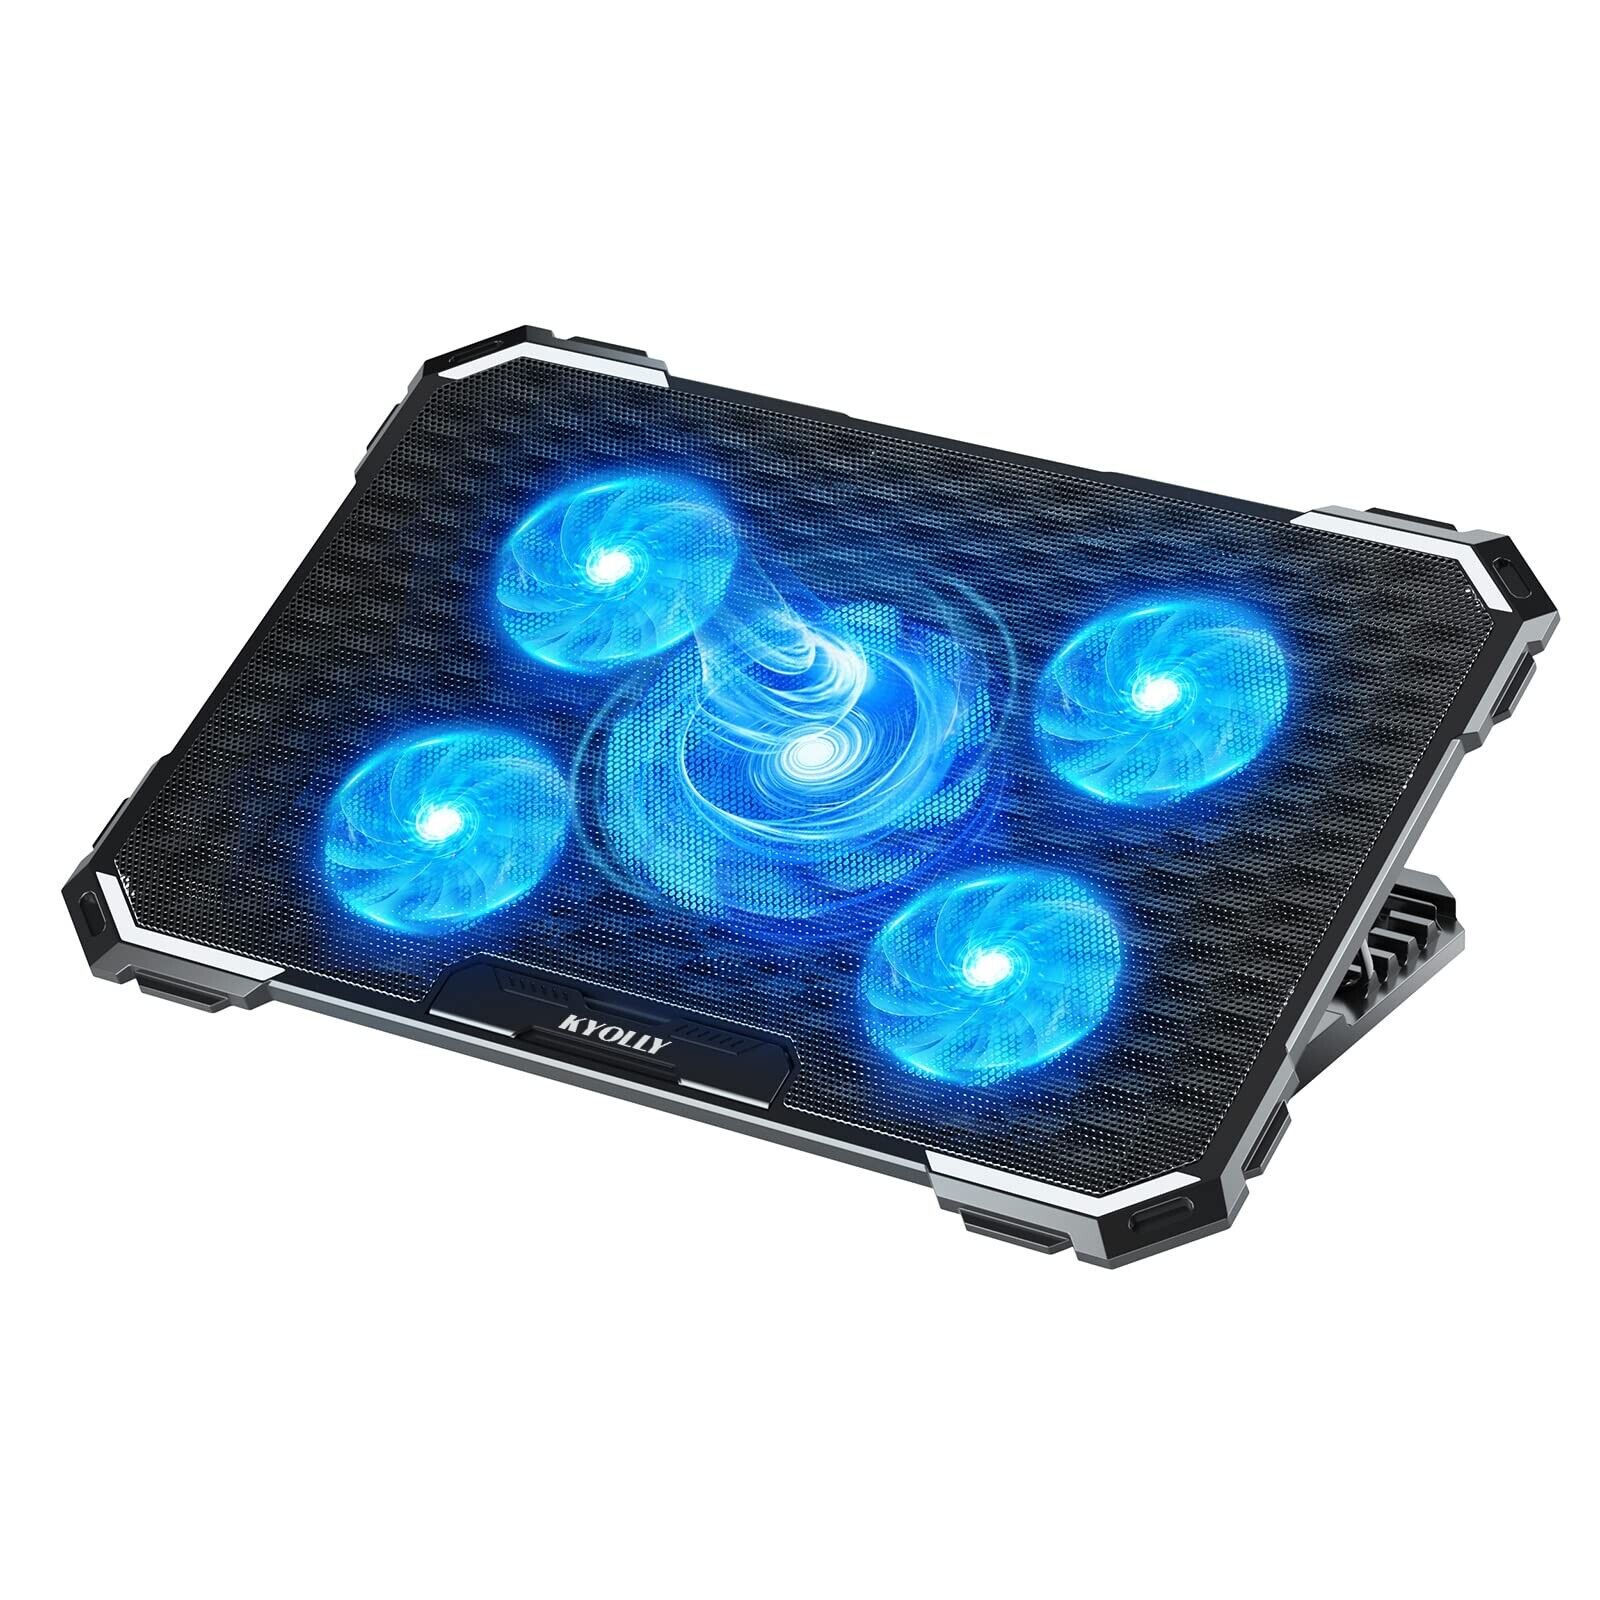 Upgrade Laptop Cooling Pad,Gaming Laptop Cooler with 5 Quiet Fans,2 USB Ports...